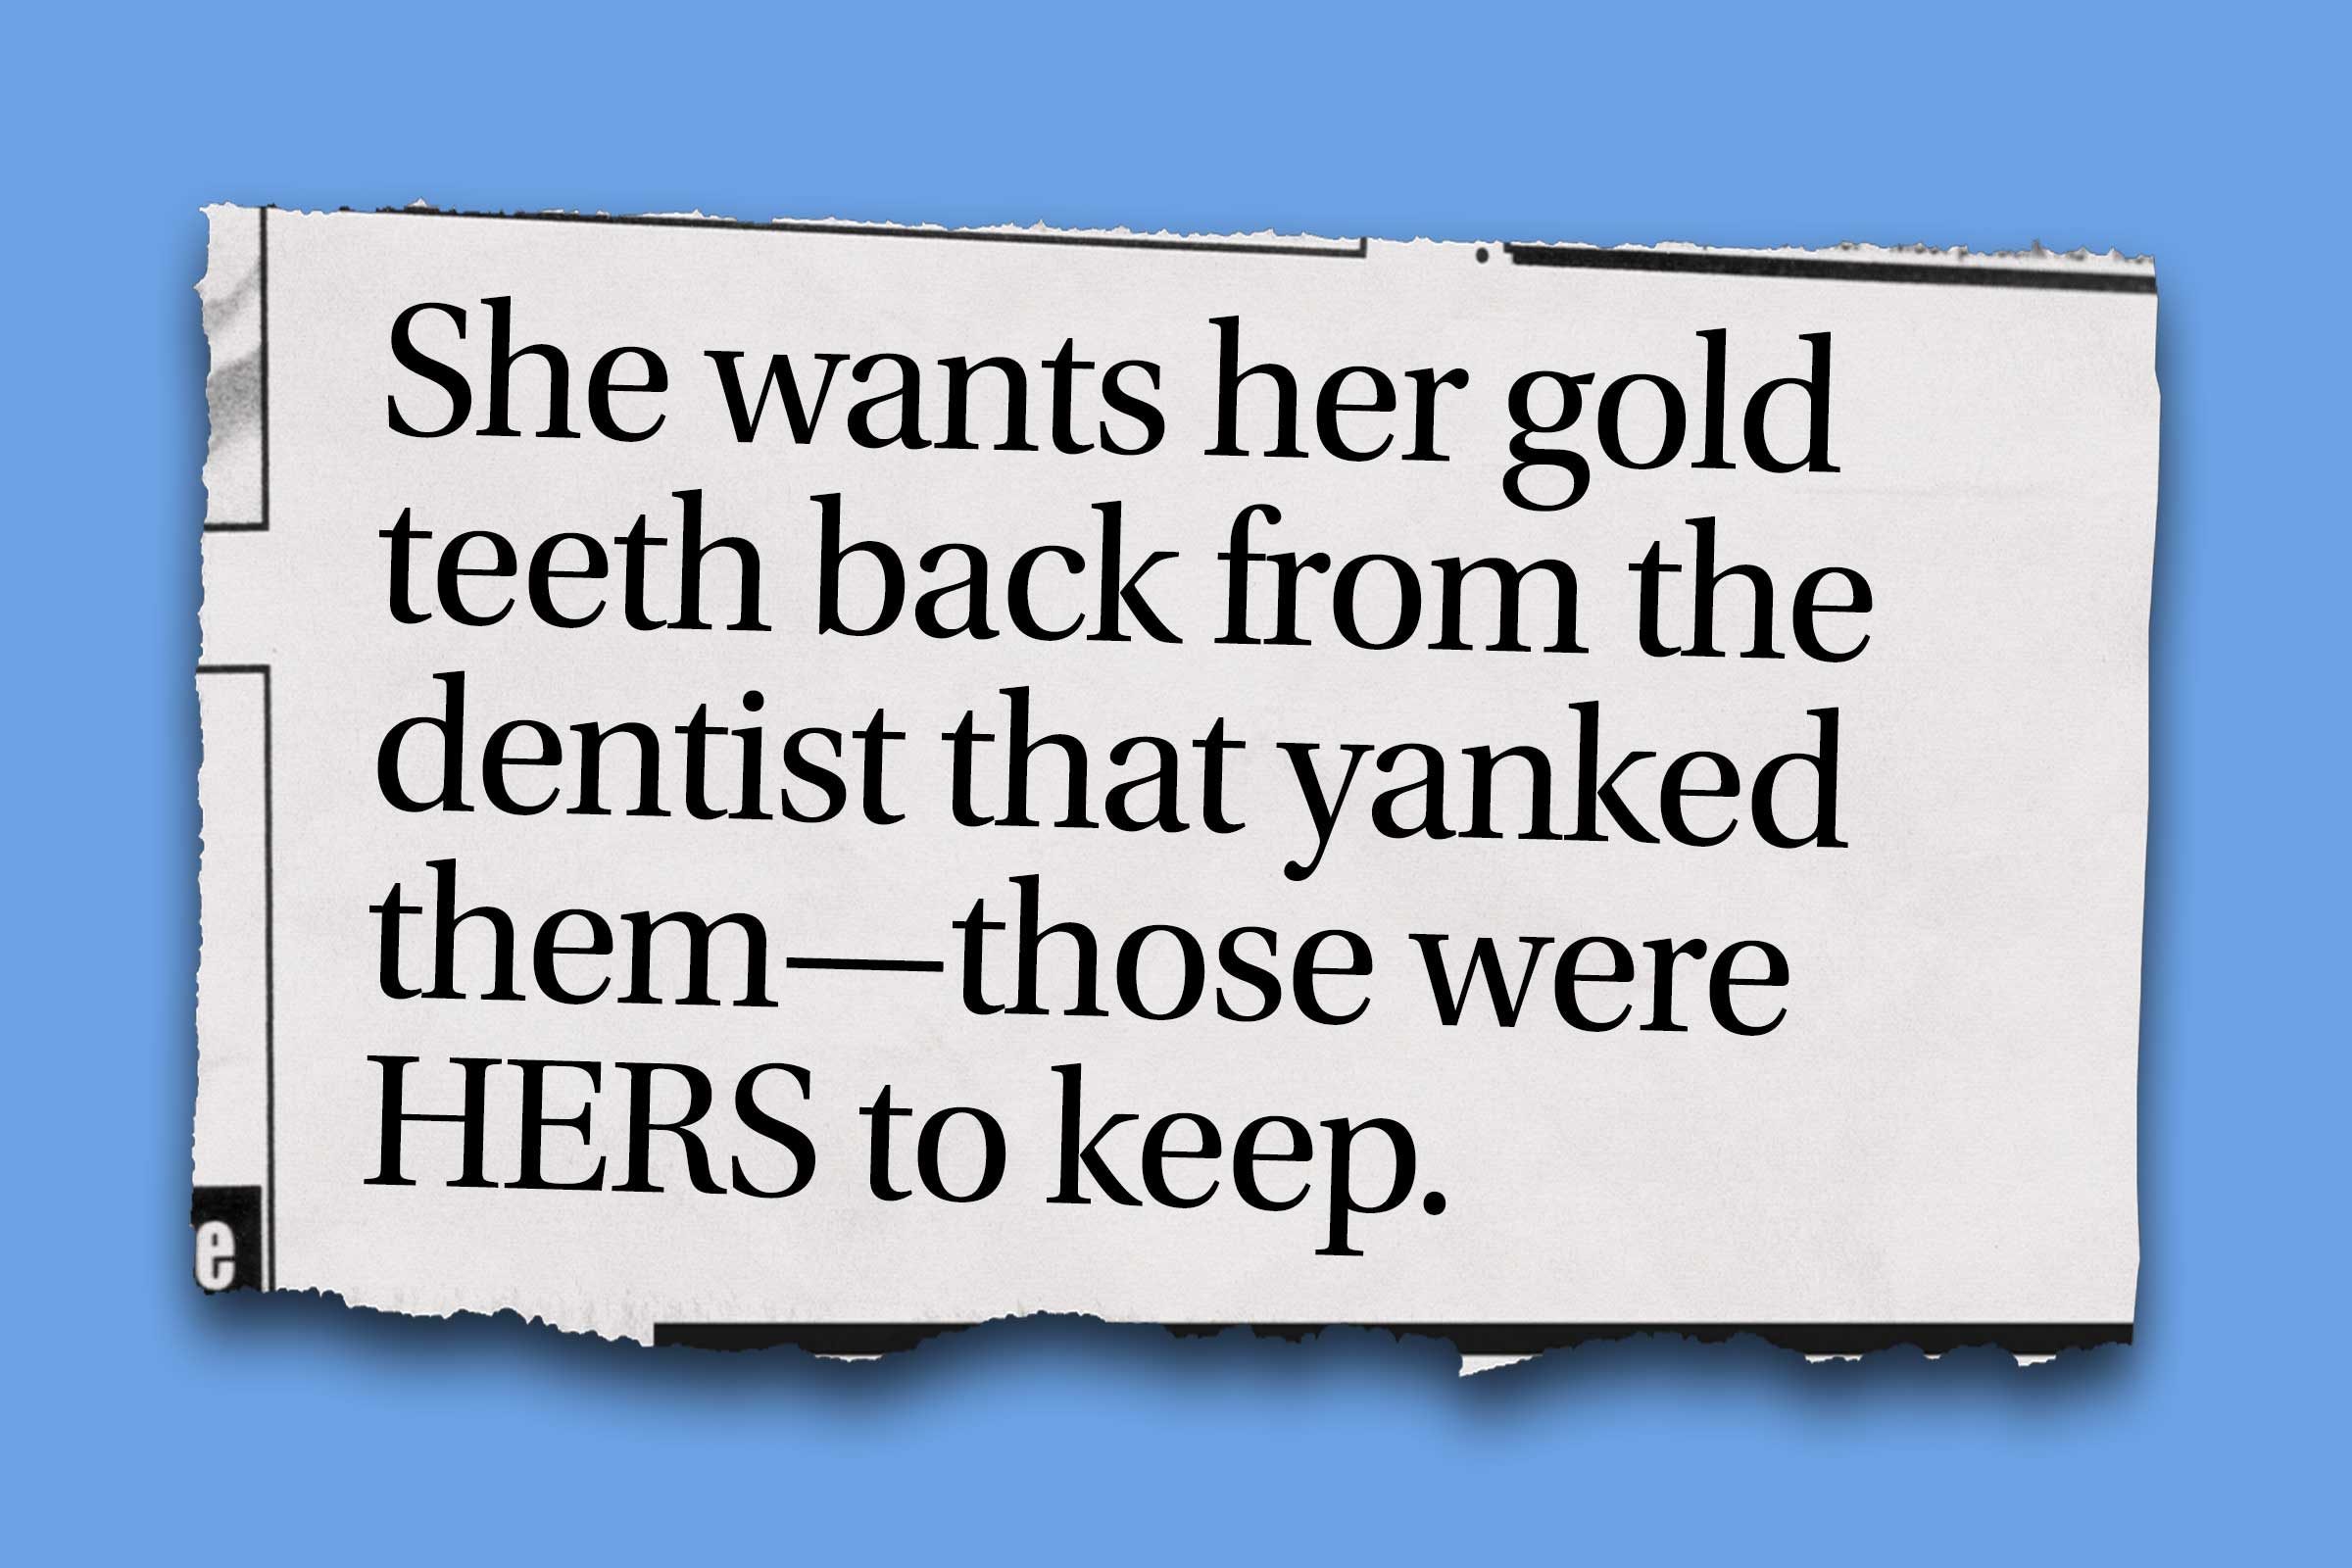 Funniest obituaries that really exist - She wants her gold teeth back from the dentist that yanked themthose were HERS to keep.